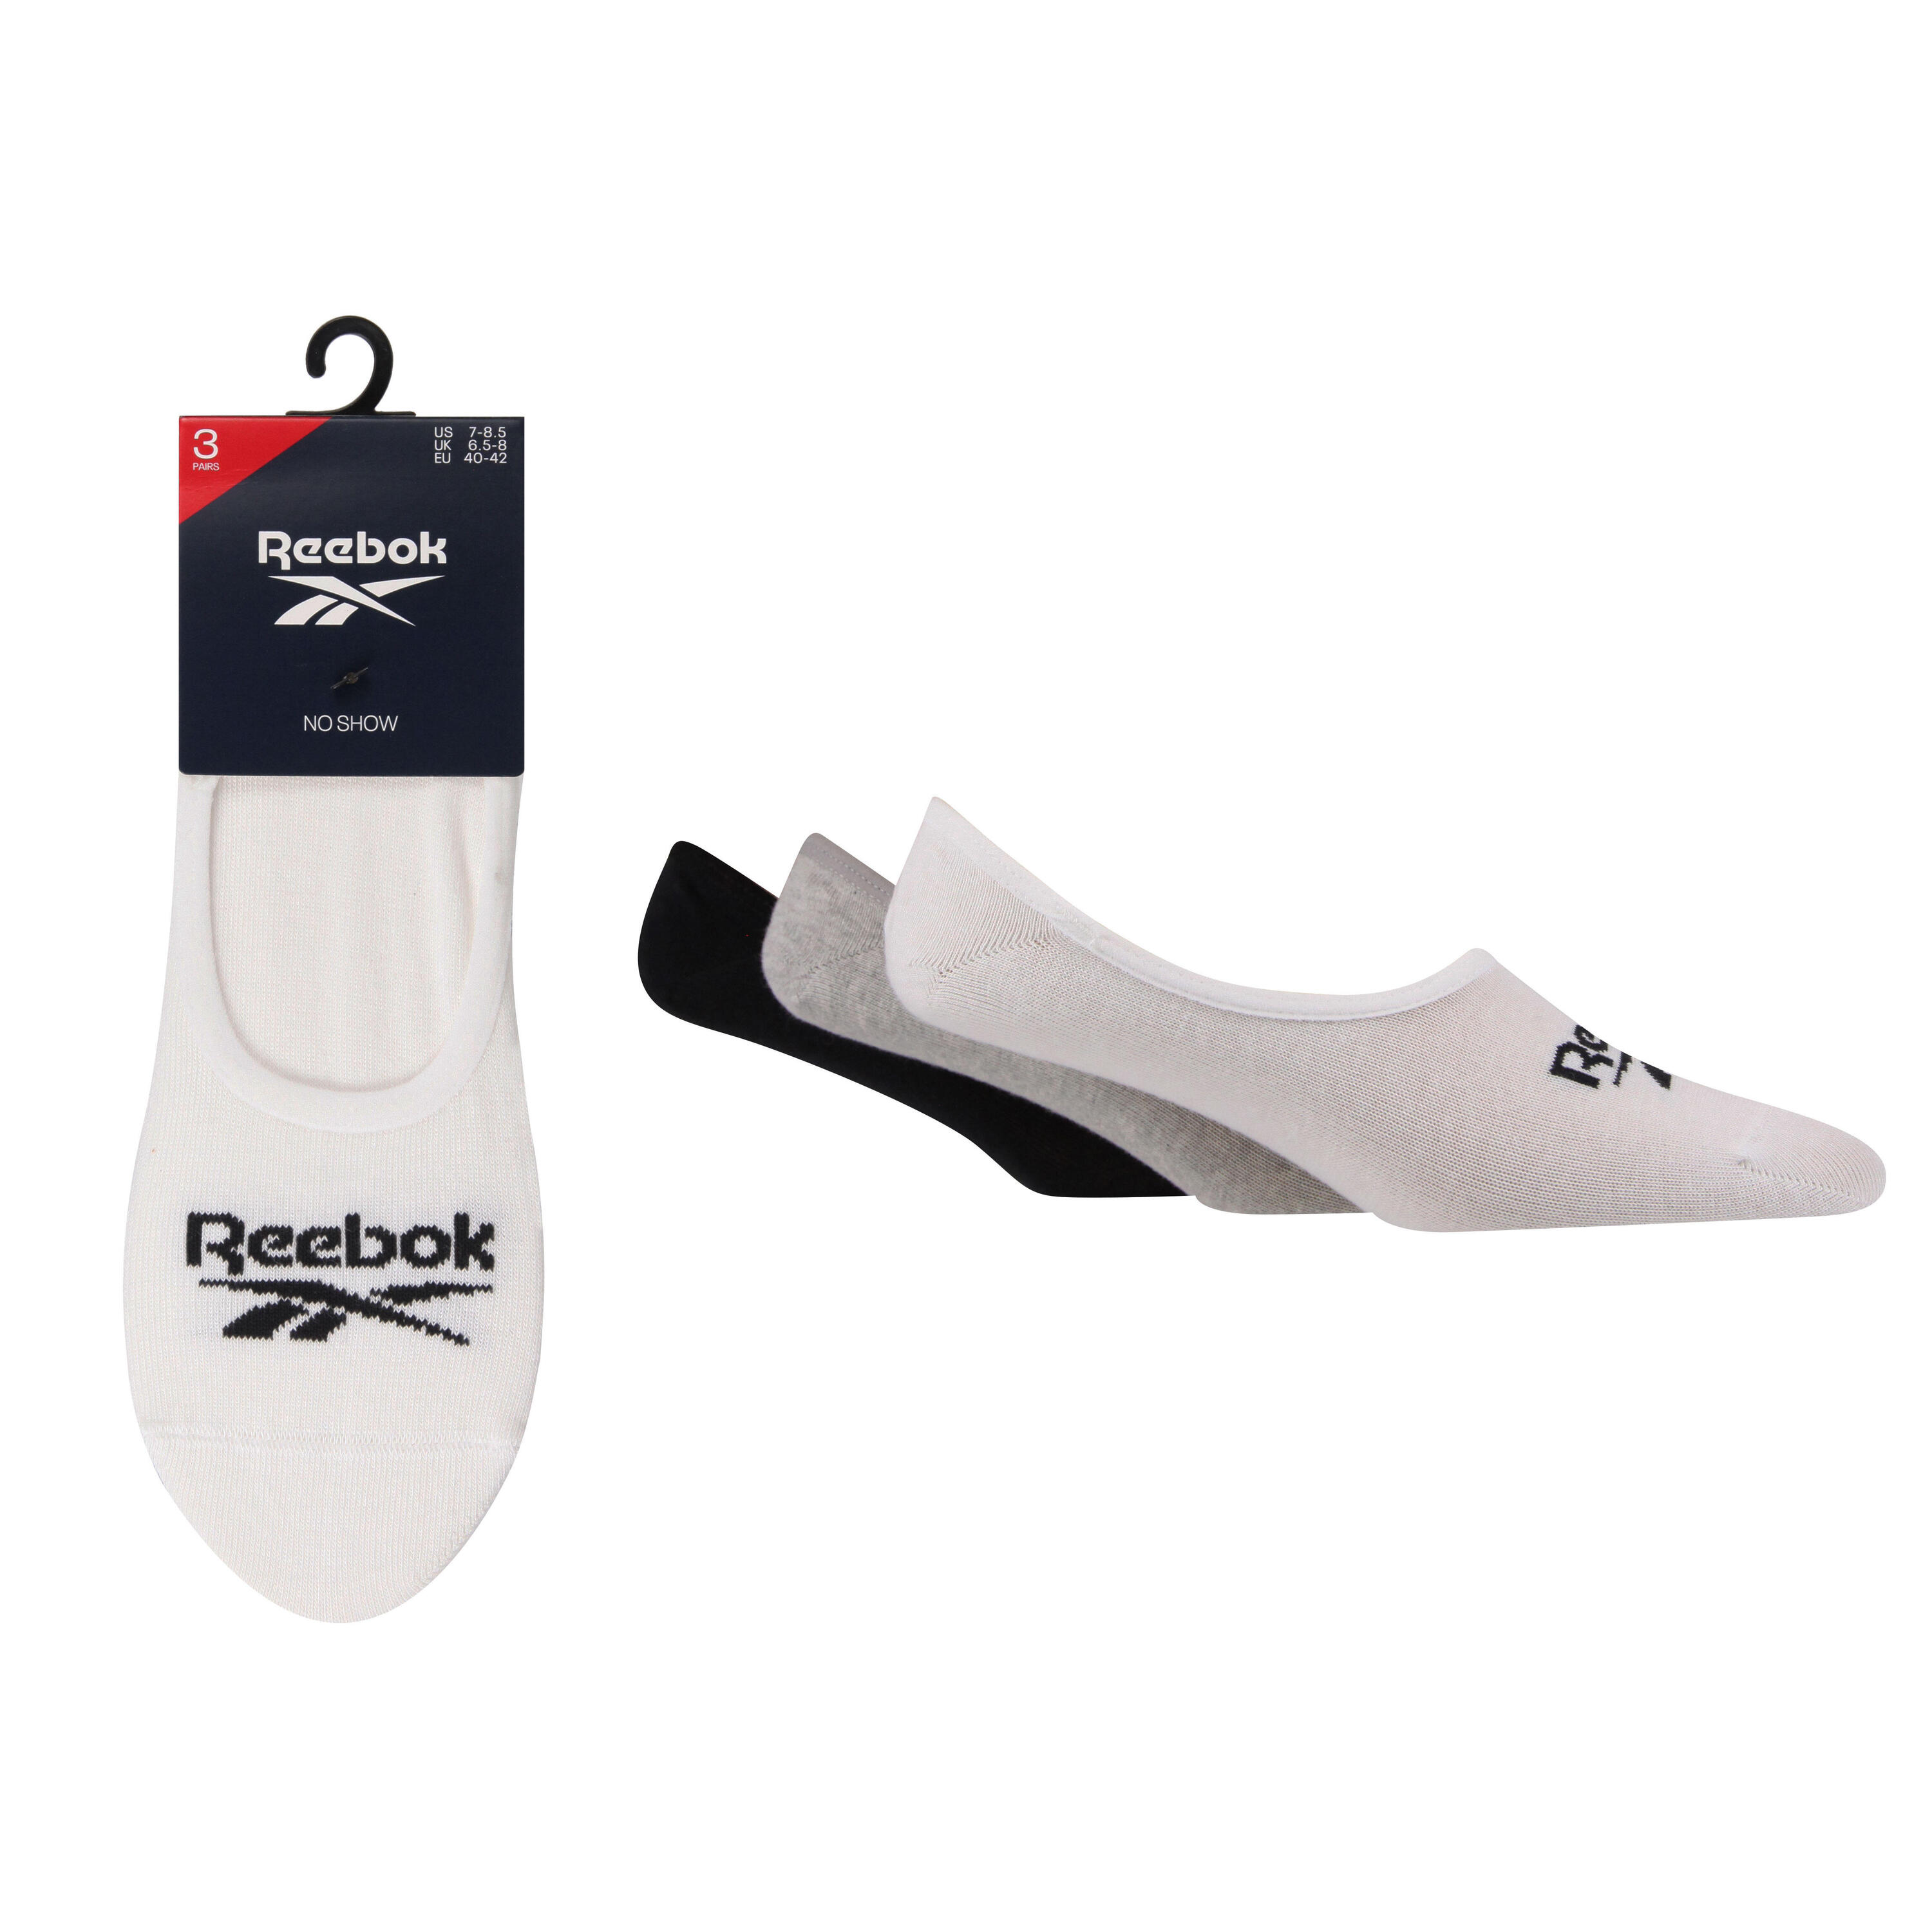 REEBOK 3 Pair Pack No Show Sports Socks With Silicon Heel Grip And Seamless Toes